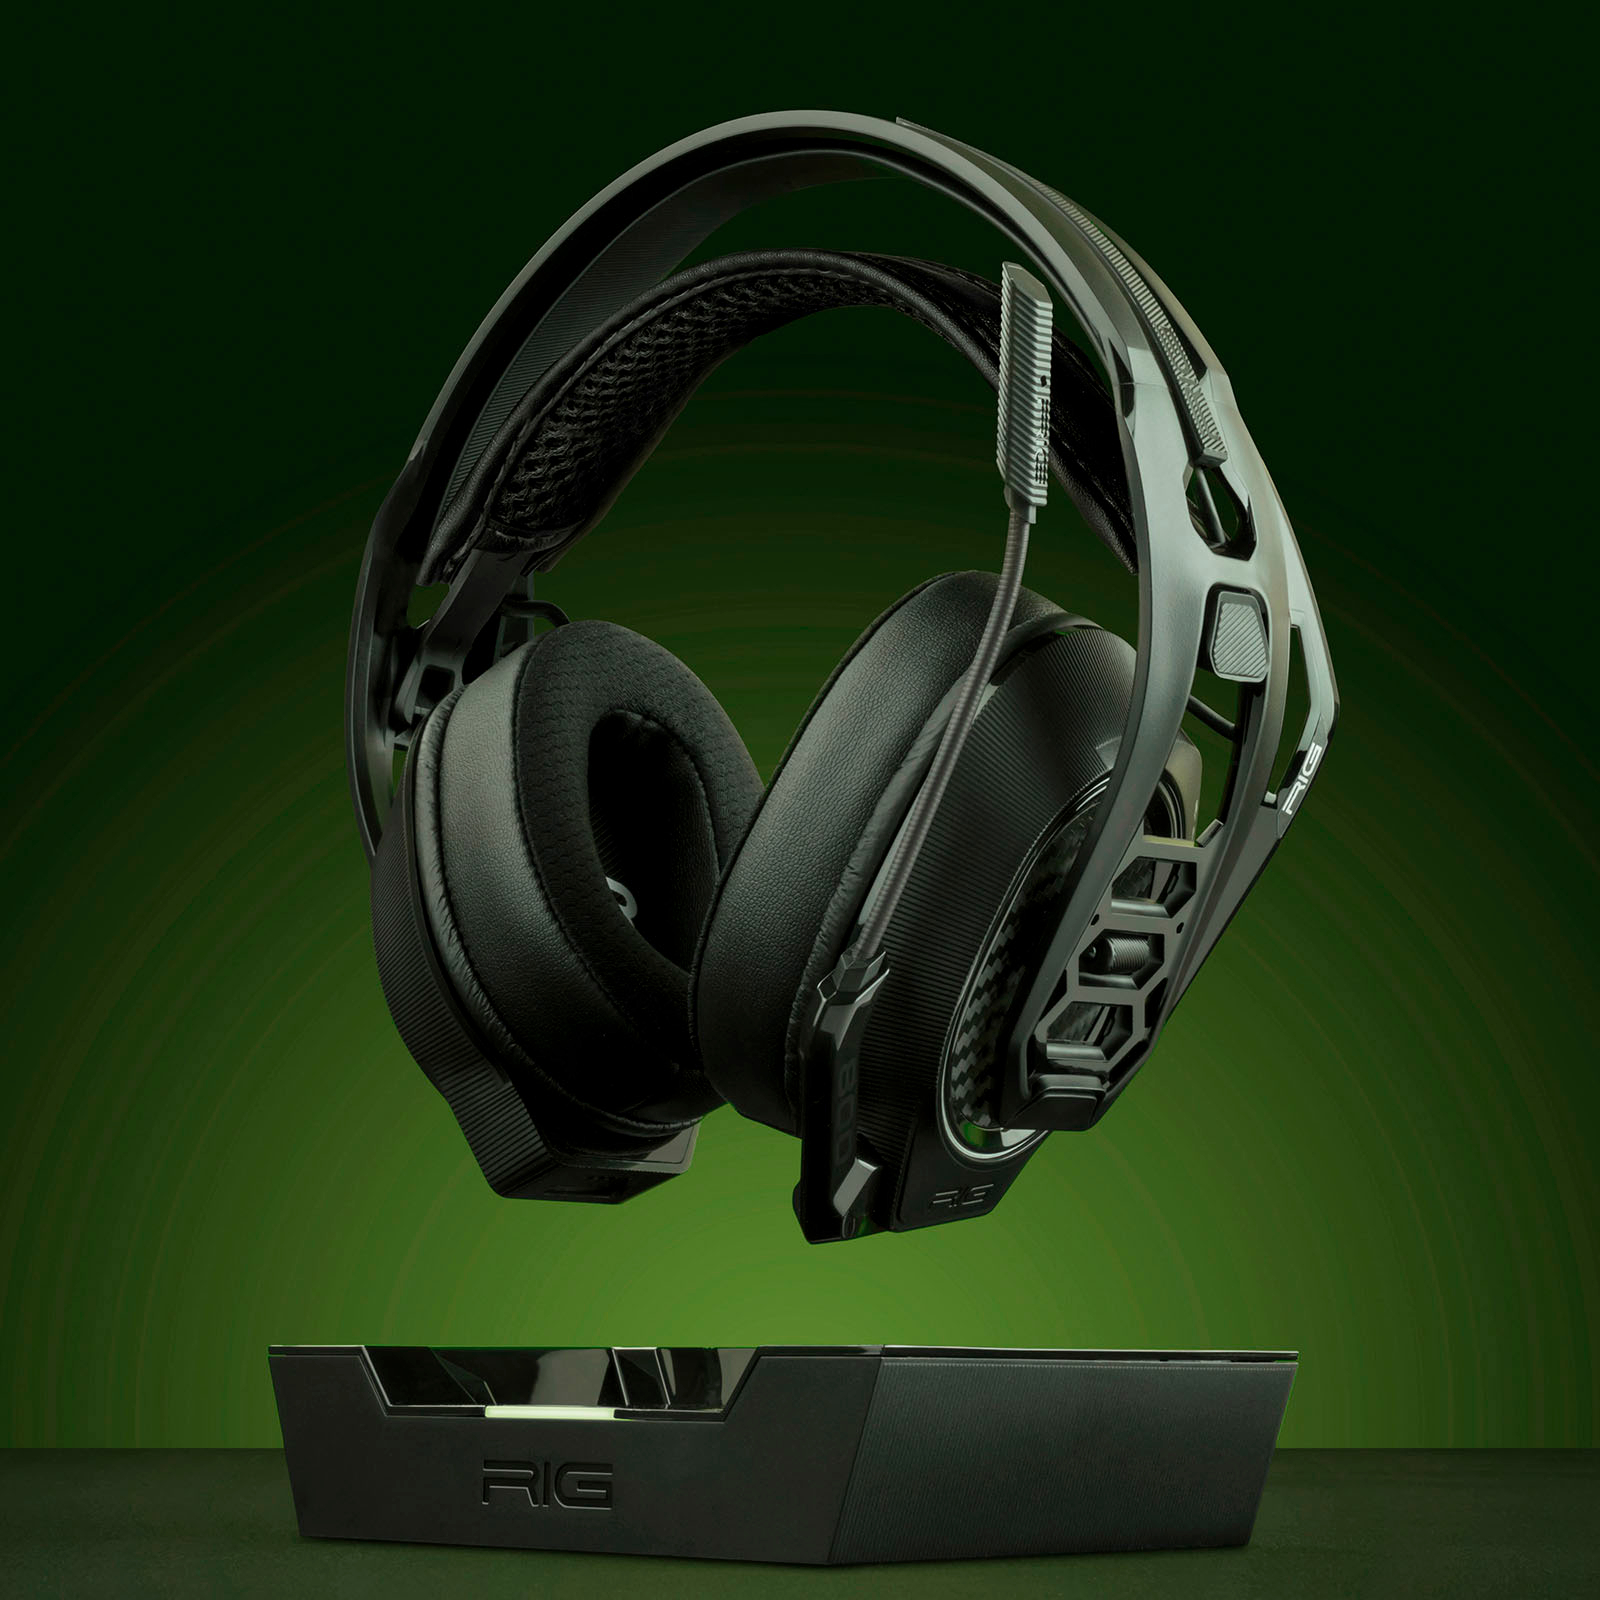 RIG 800 Pro HX Wireless Black - Gaming Best for Xbox 10-1172-01 Buy Headset